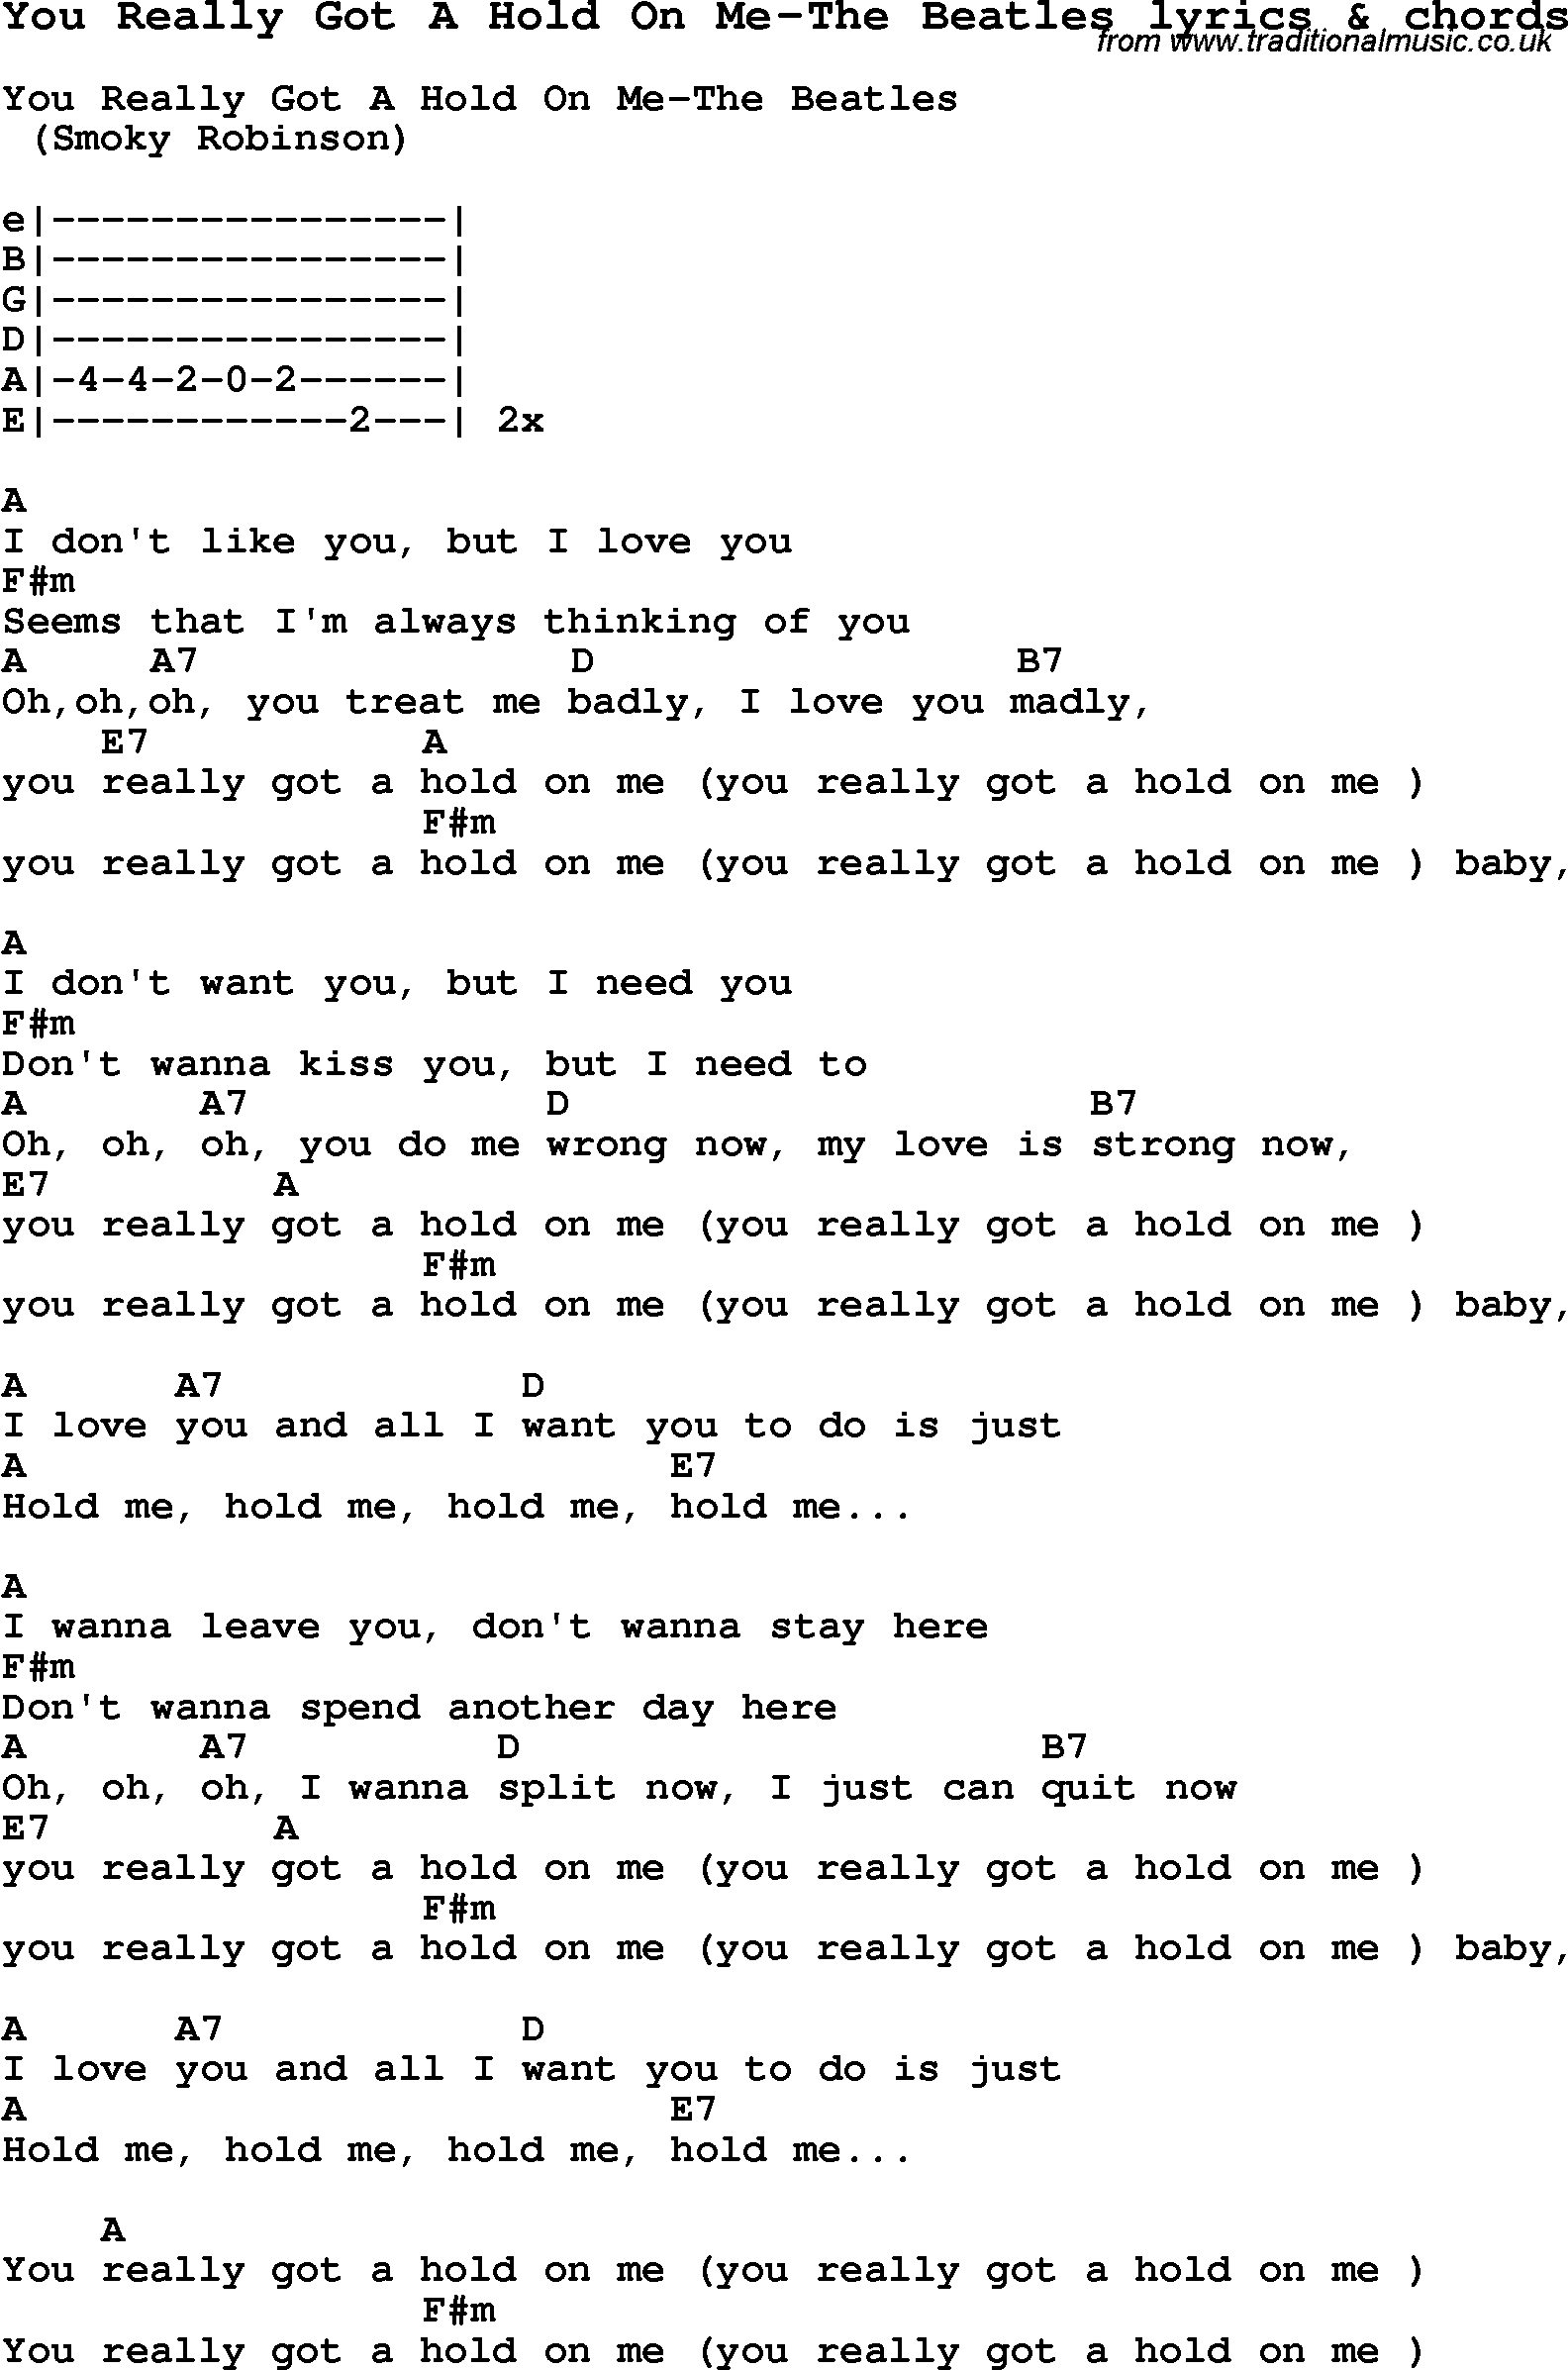 Love Song Lyrics for: You Really Got A Hold On Me-The Beatles with chords for Ukulele, Guitar Banjo etc.